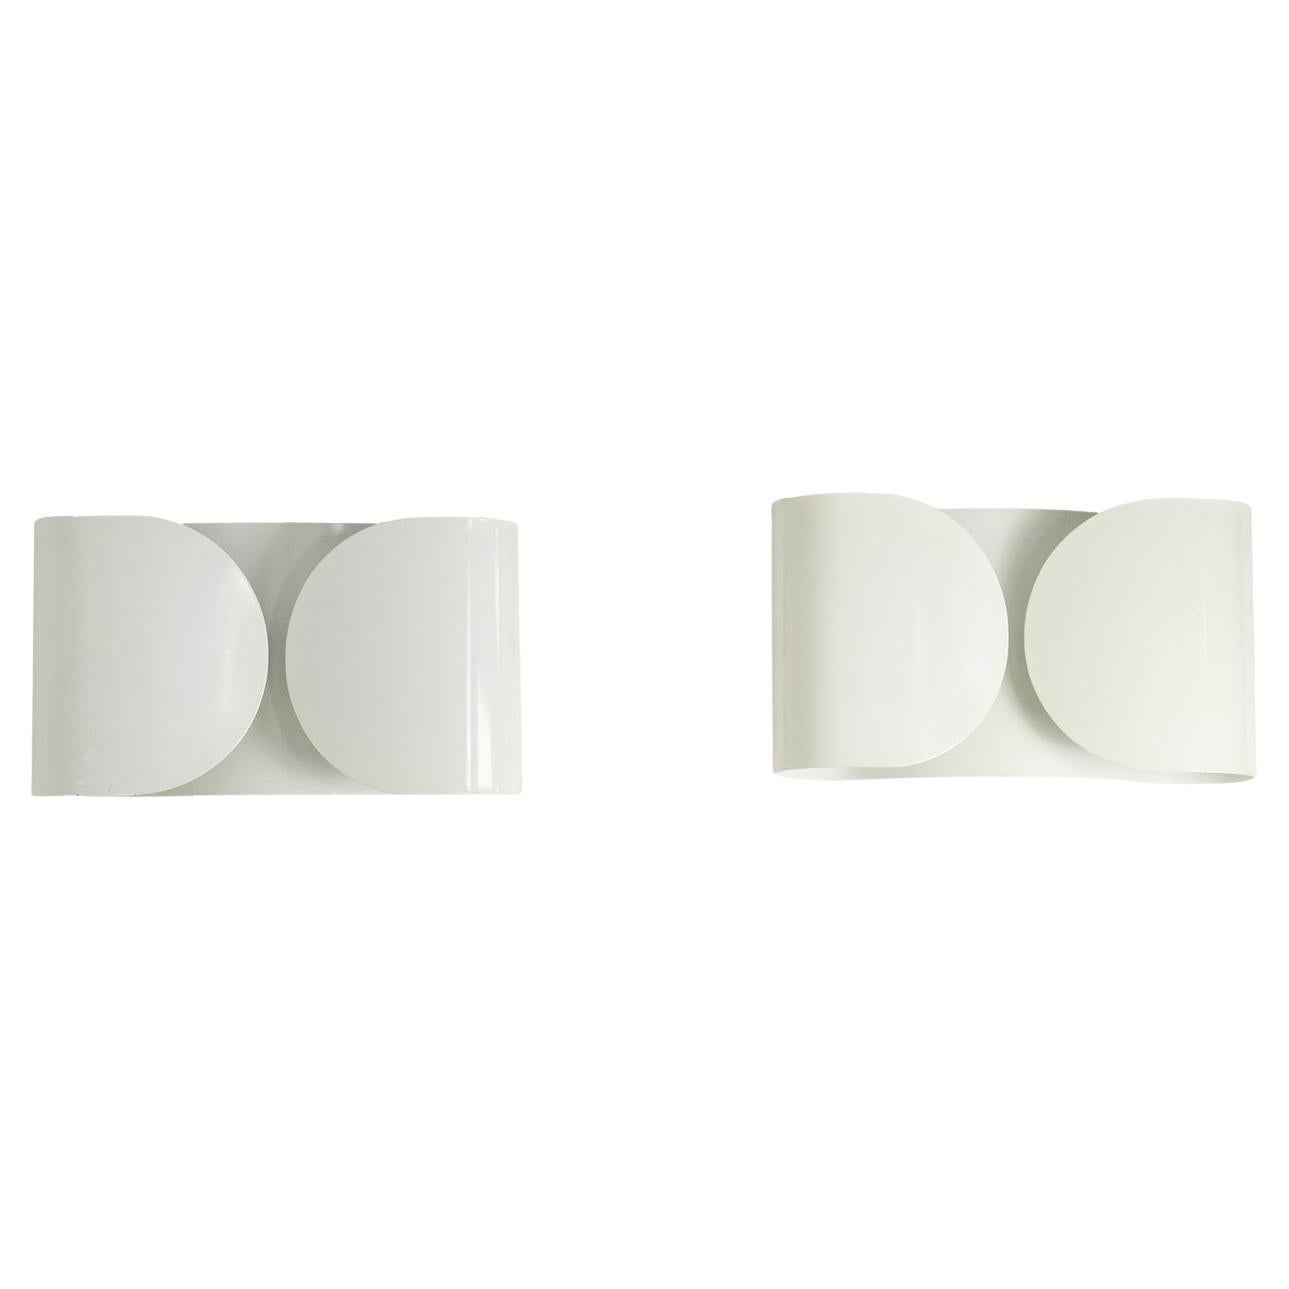 Tobia Scarpa for Flos, Series of Four Wall Lights, 1980s For Sale